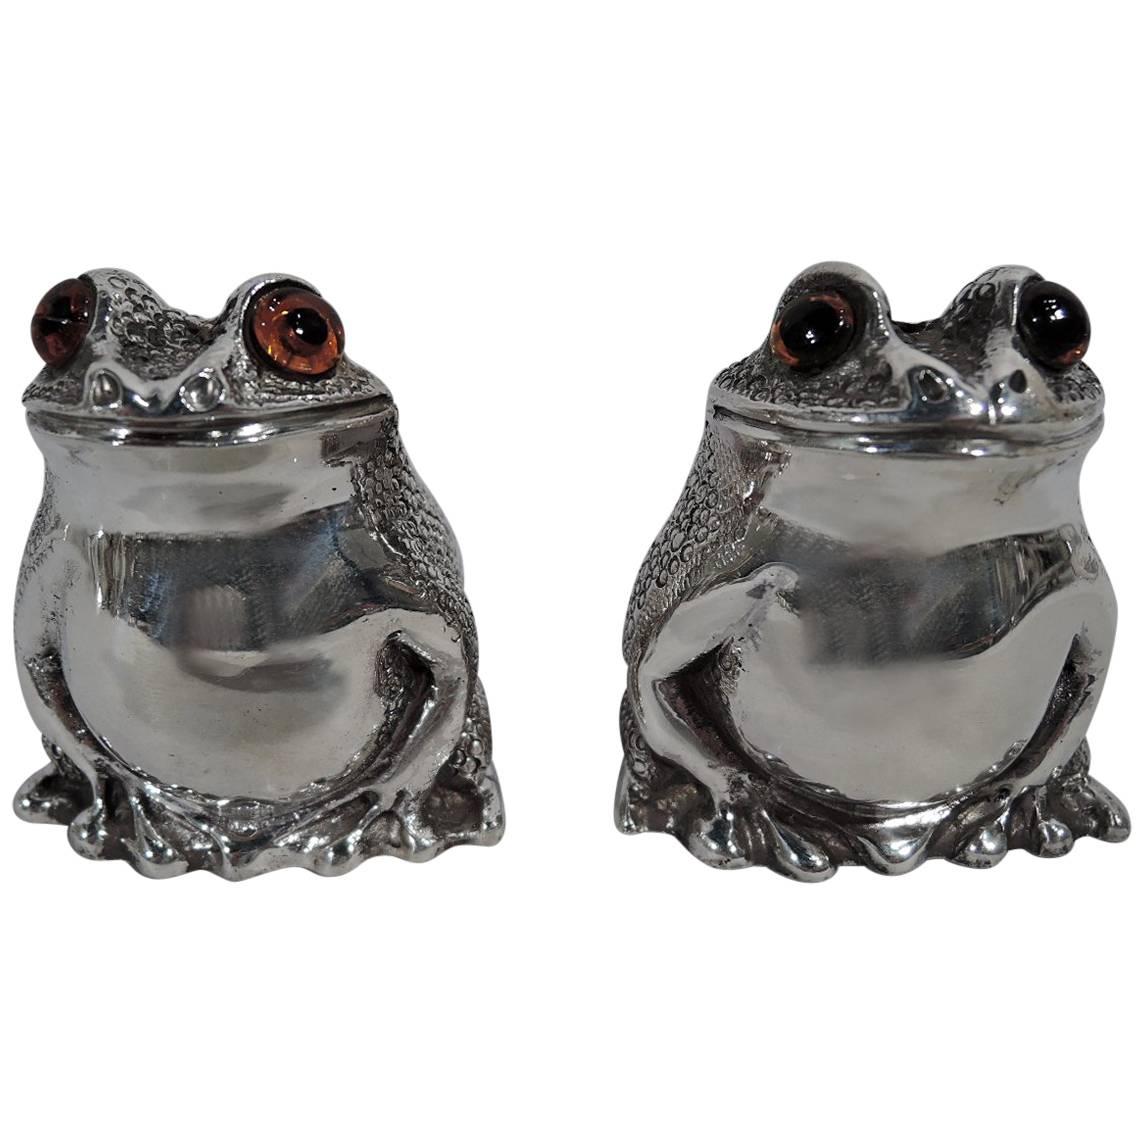 Pair of English Sterling Silver Novelty Frog Salt and Pepper Shakers